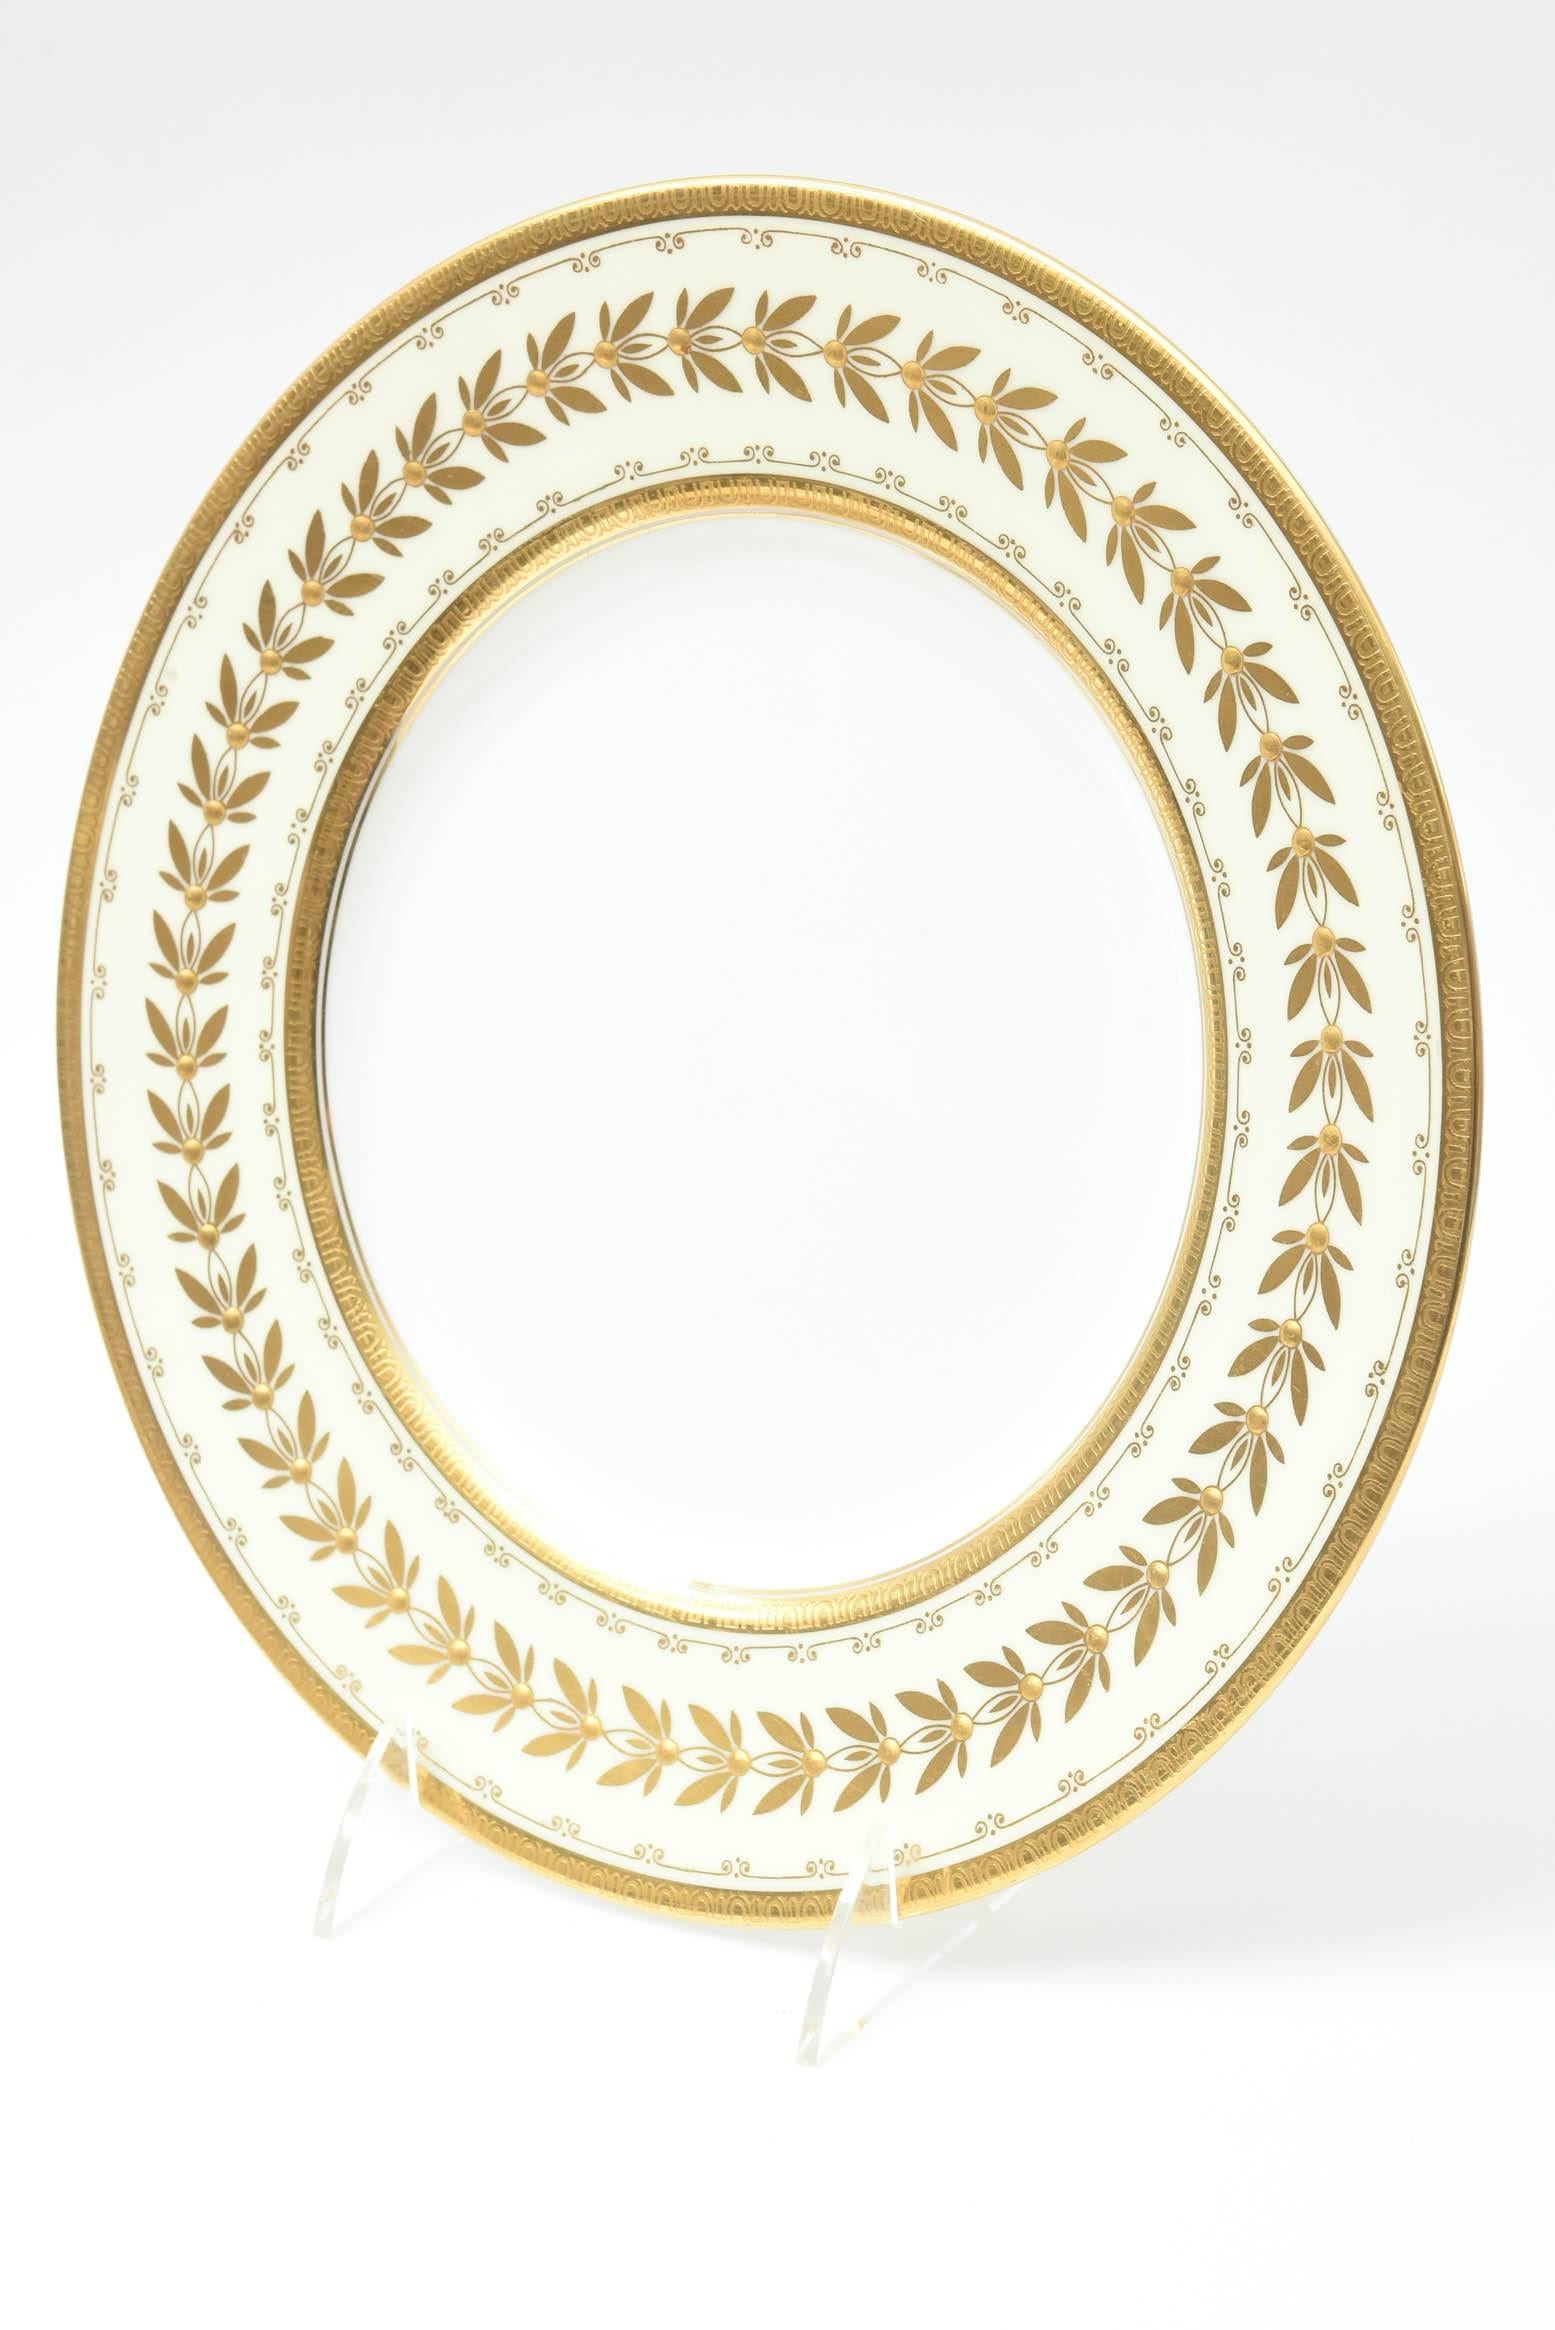 Porcelain 12 Dinner Plates, Custom for Tiffany, Antique with Raised Gold